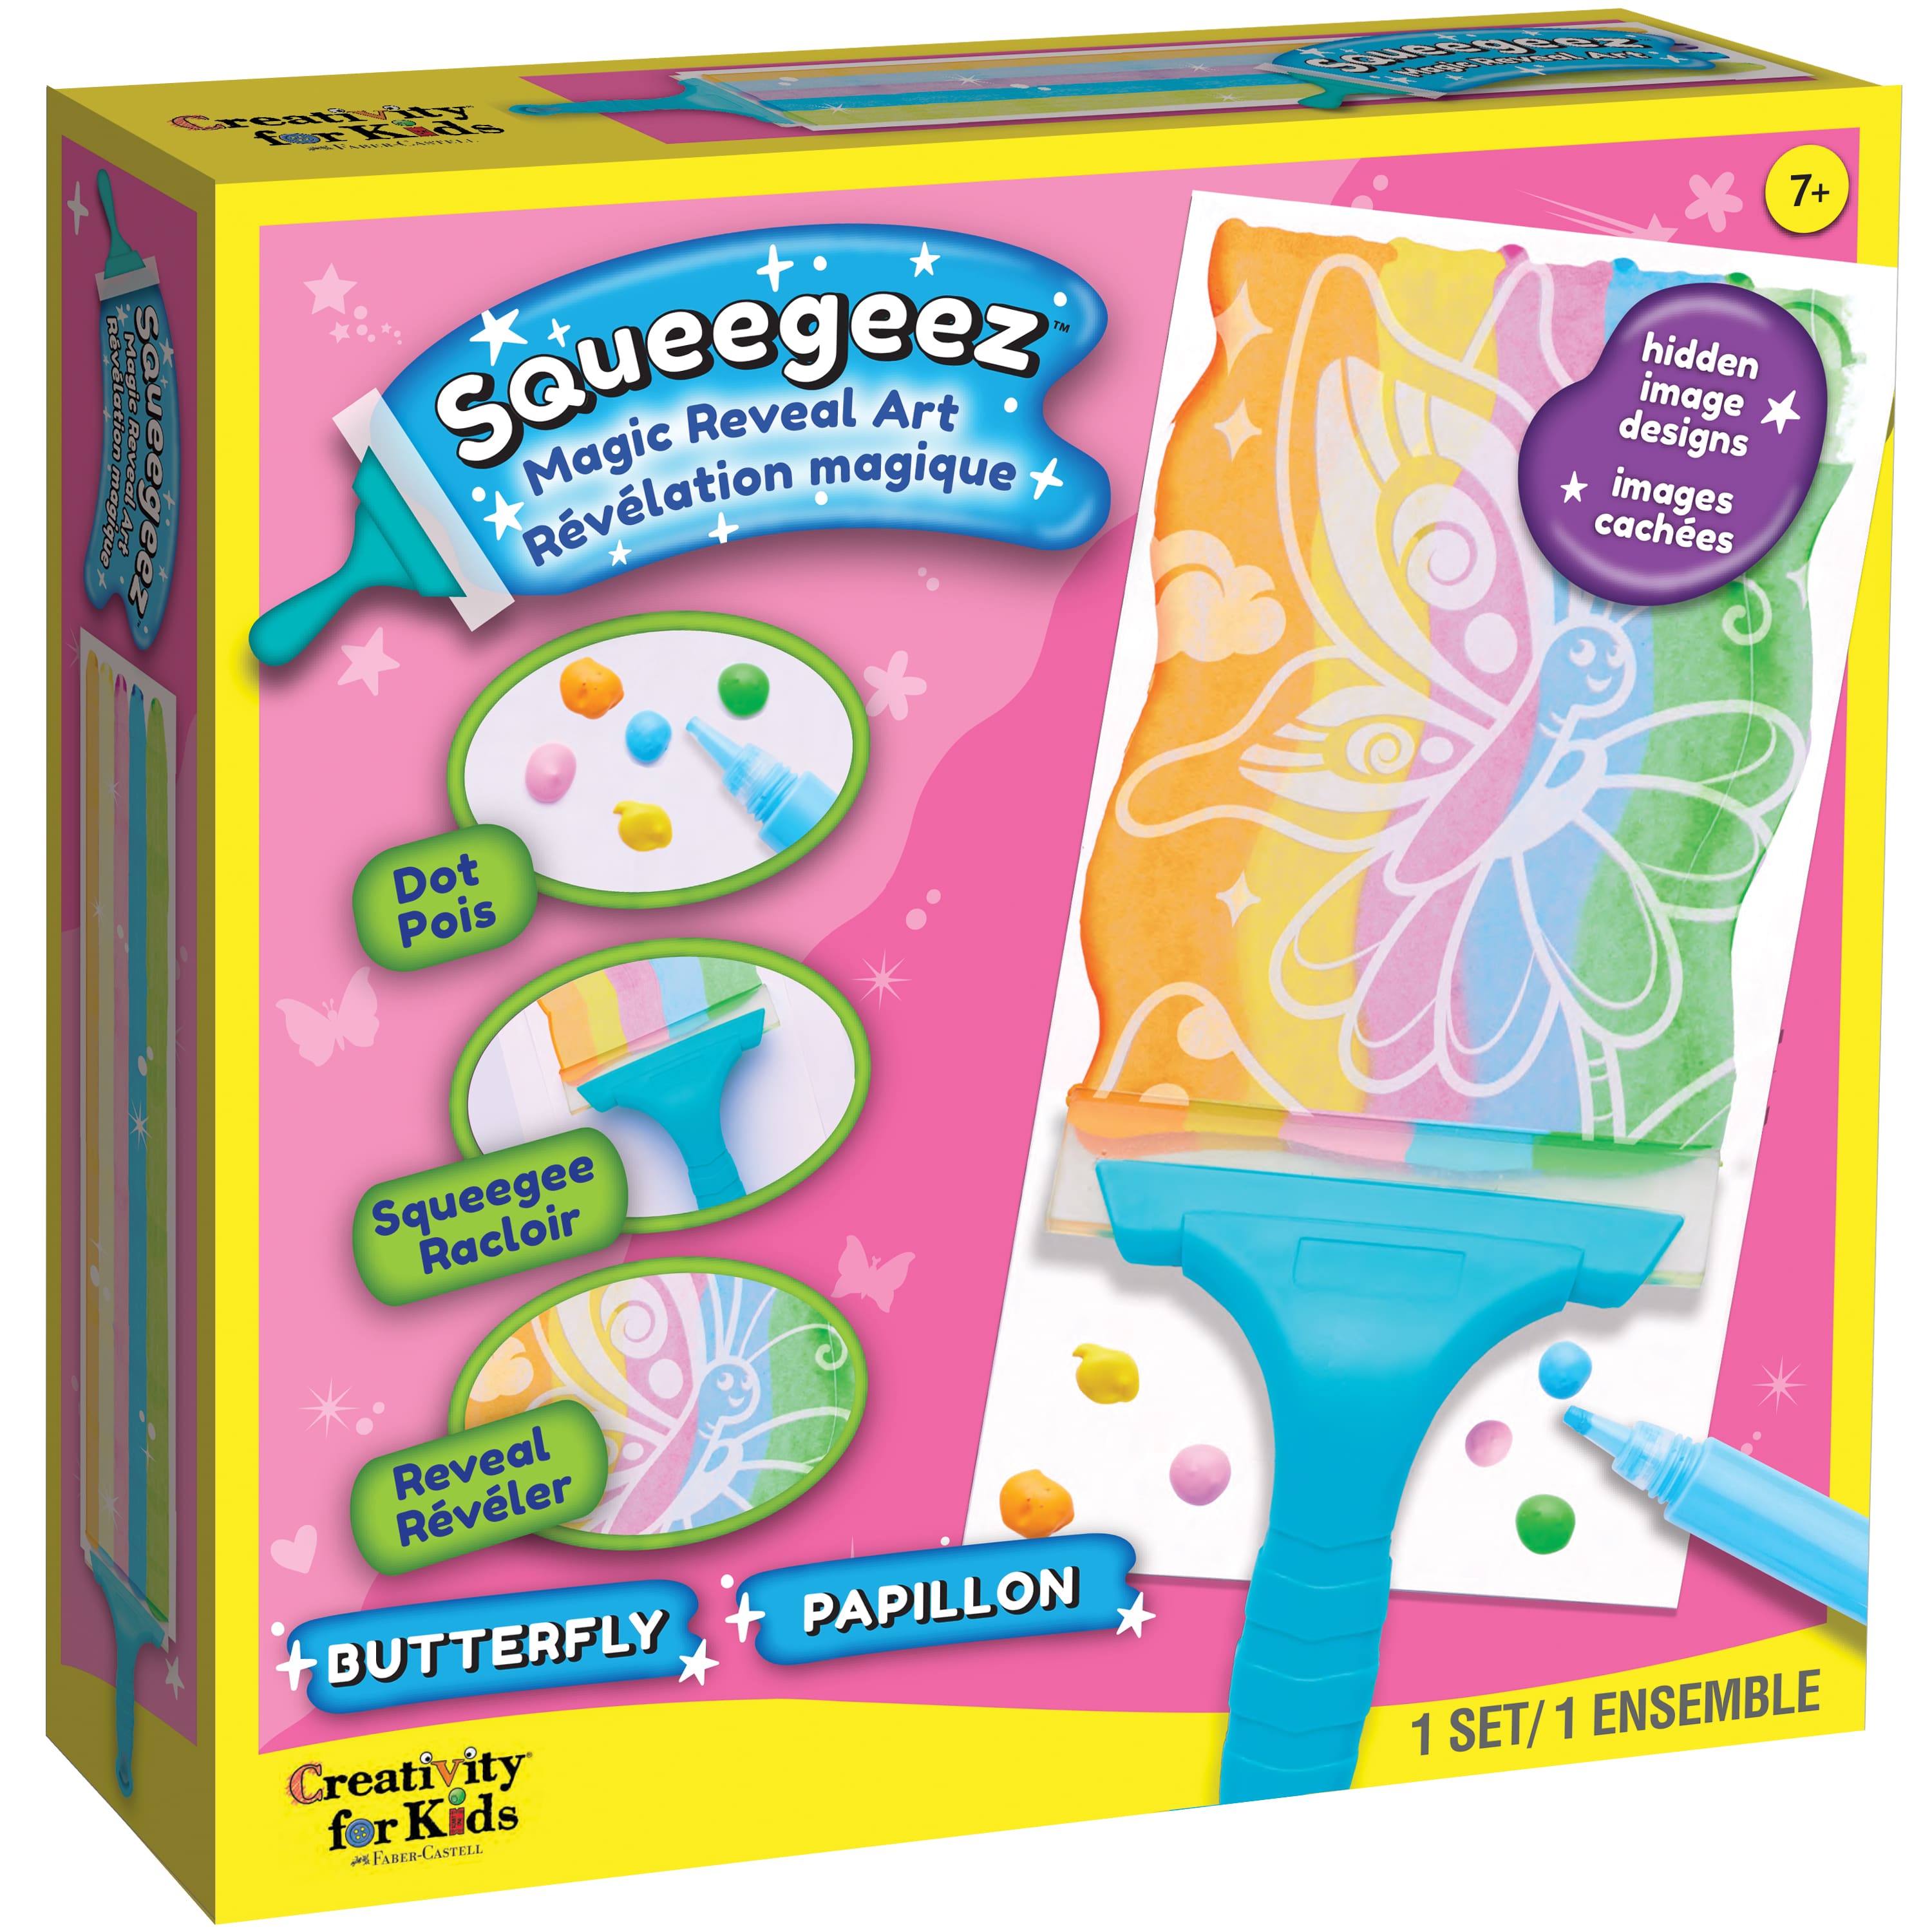 Creativity for Kids® Squeegeez™ Butterfly Magic Reveal Art Set | Michaels